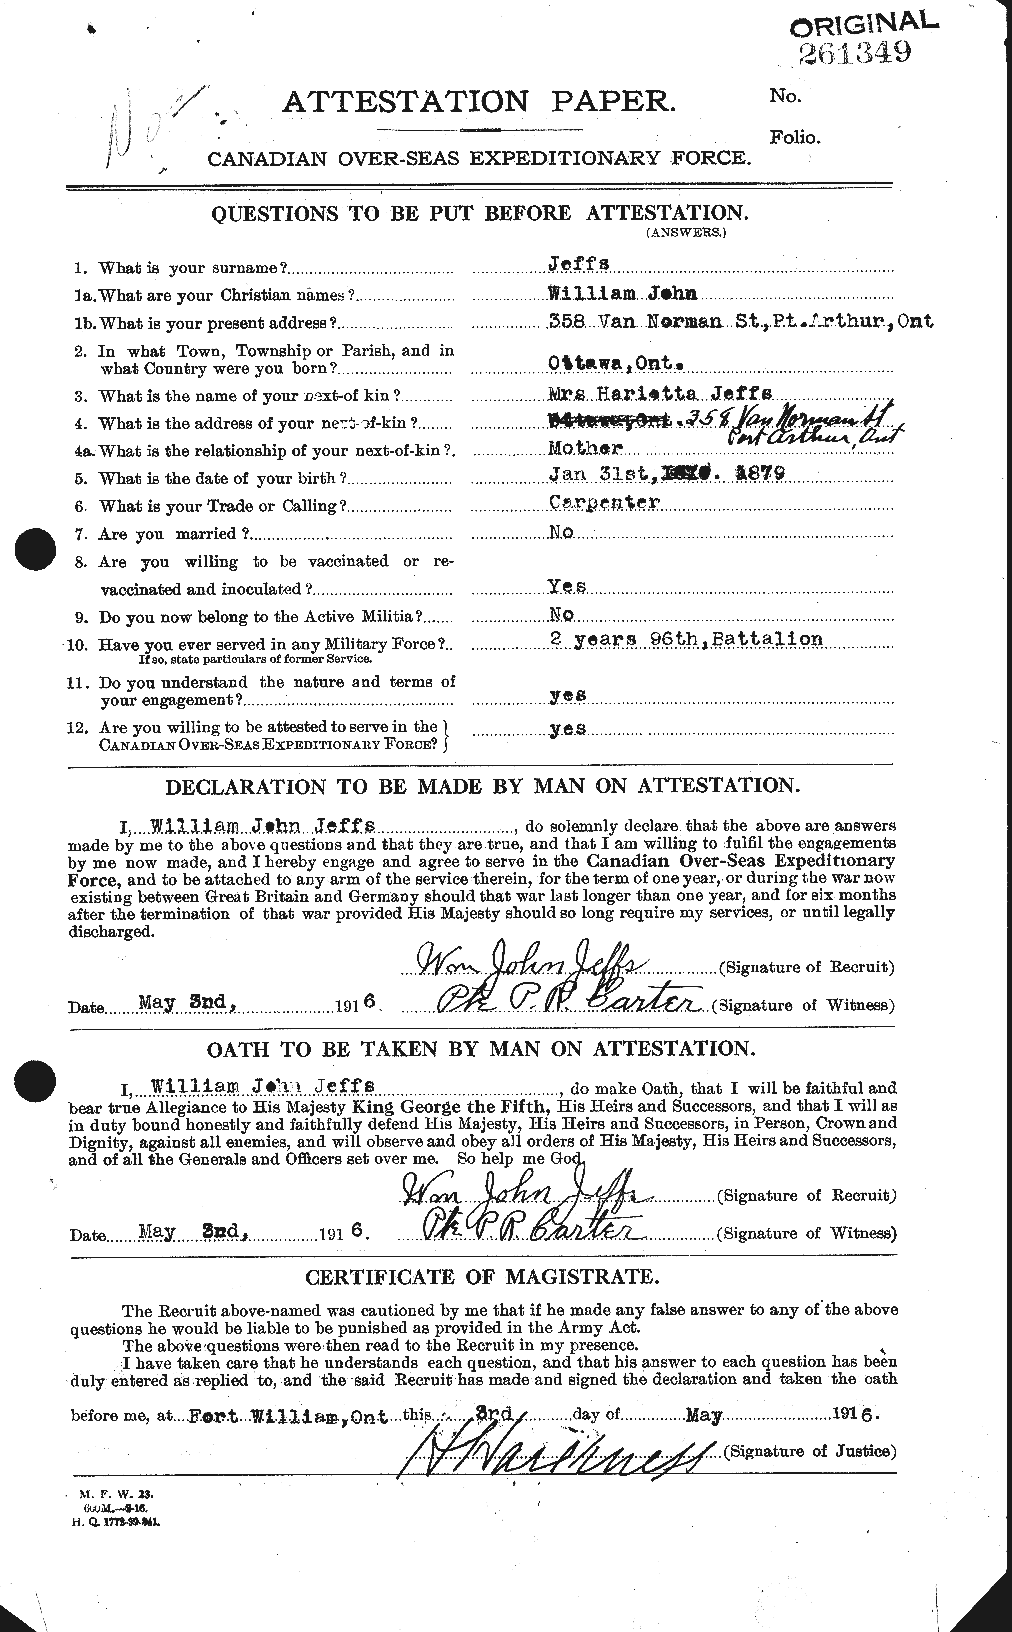 Personnel Records of the First World War - CEF 419570a